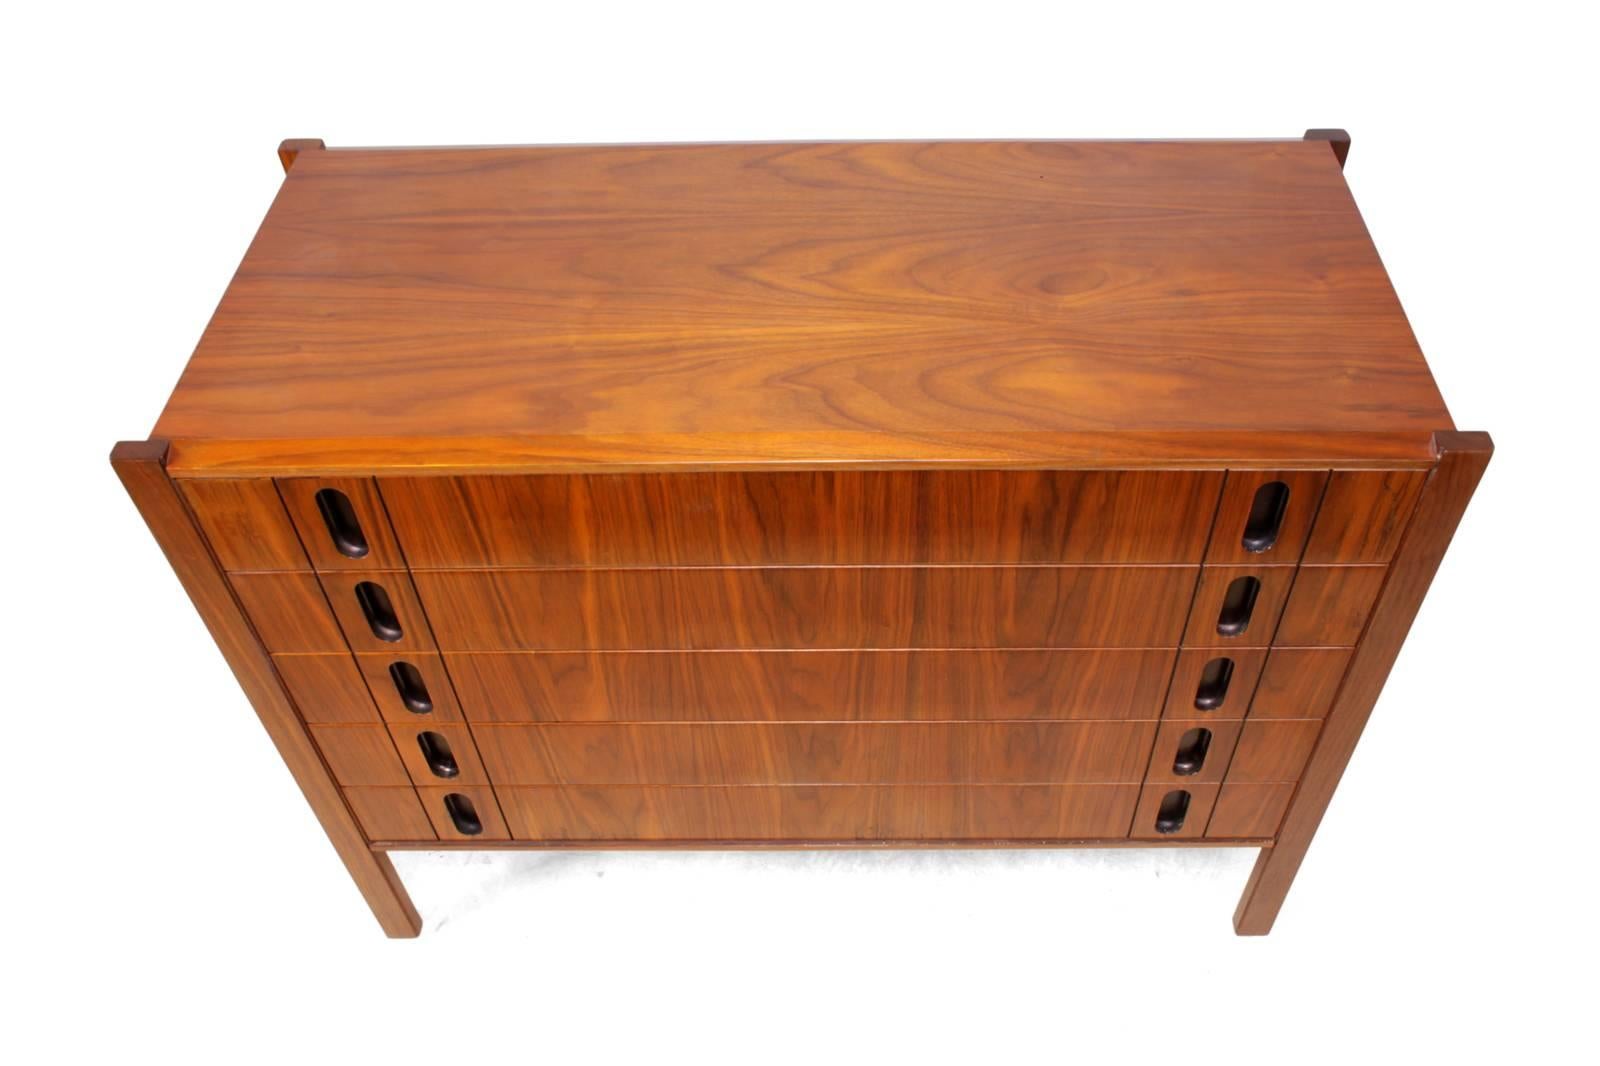 Midcentury walnut chest of drawers
A good quality five long drawer chest with inset handles and external legs this chest is in very good condition and has been professionally hand polished.

Age: 1960

Style: Mid-Century Modern

Material: